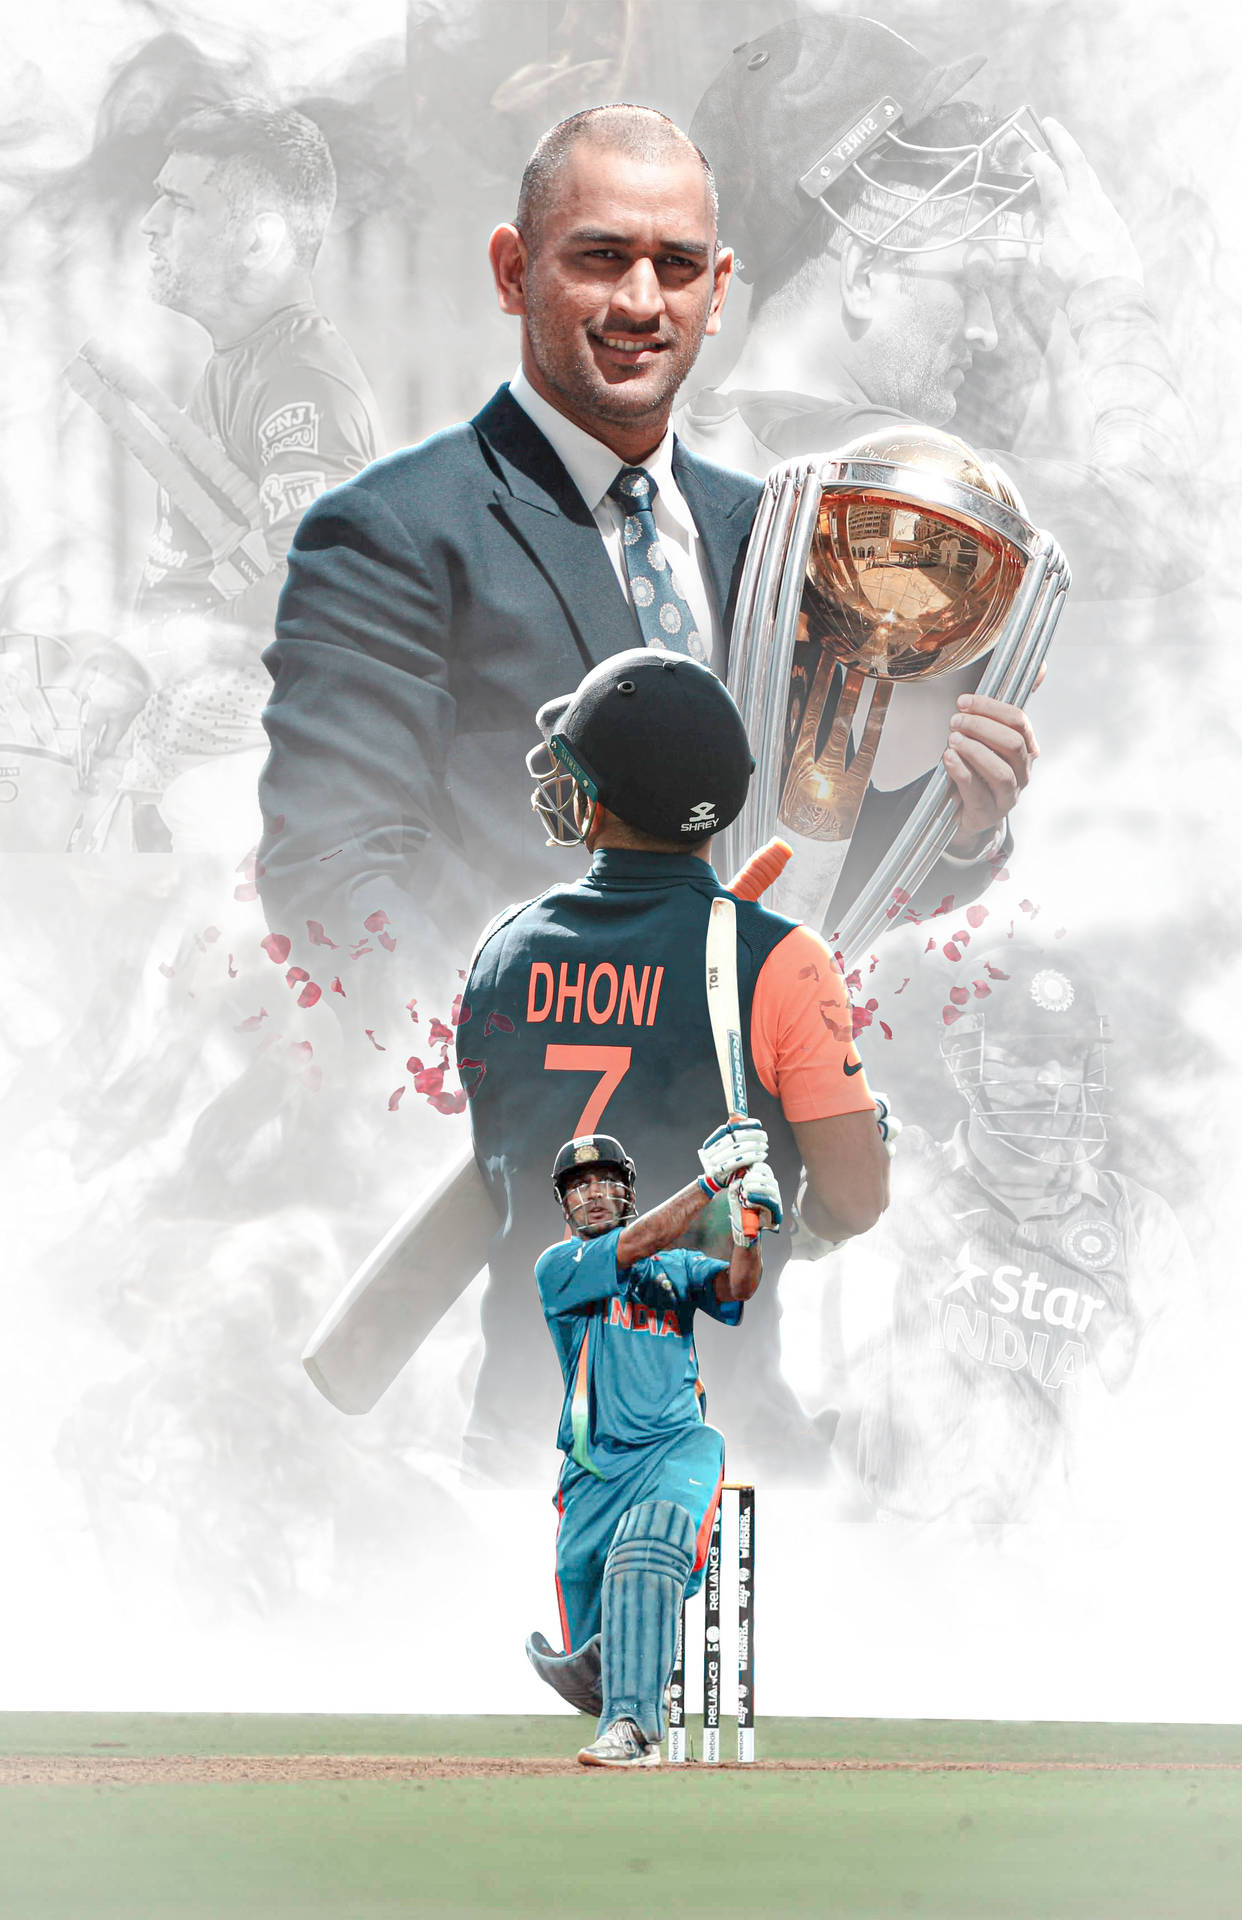 Download Icc World Cup Trophy Dhoni Hd Wallpaper 